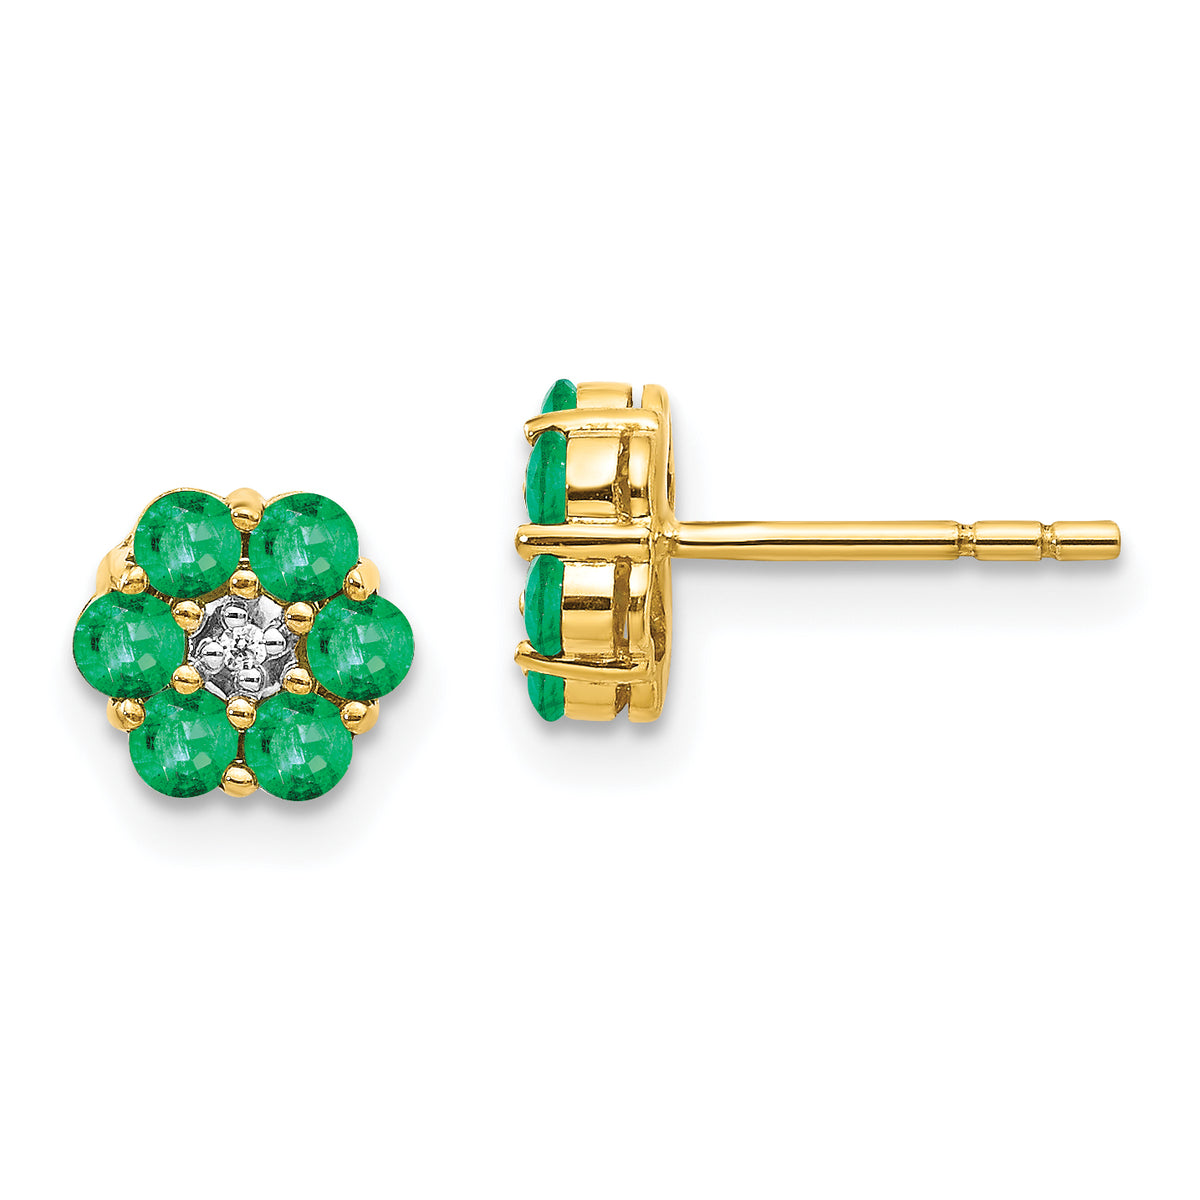 10k and Rhodium Emerald and Diamond Post Earrings